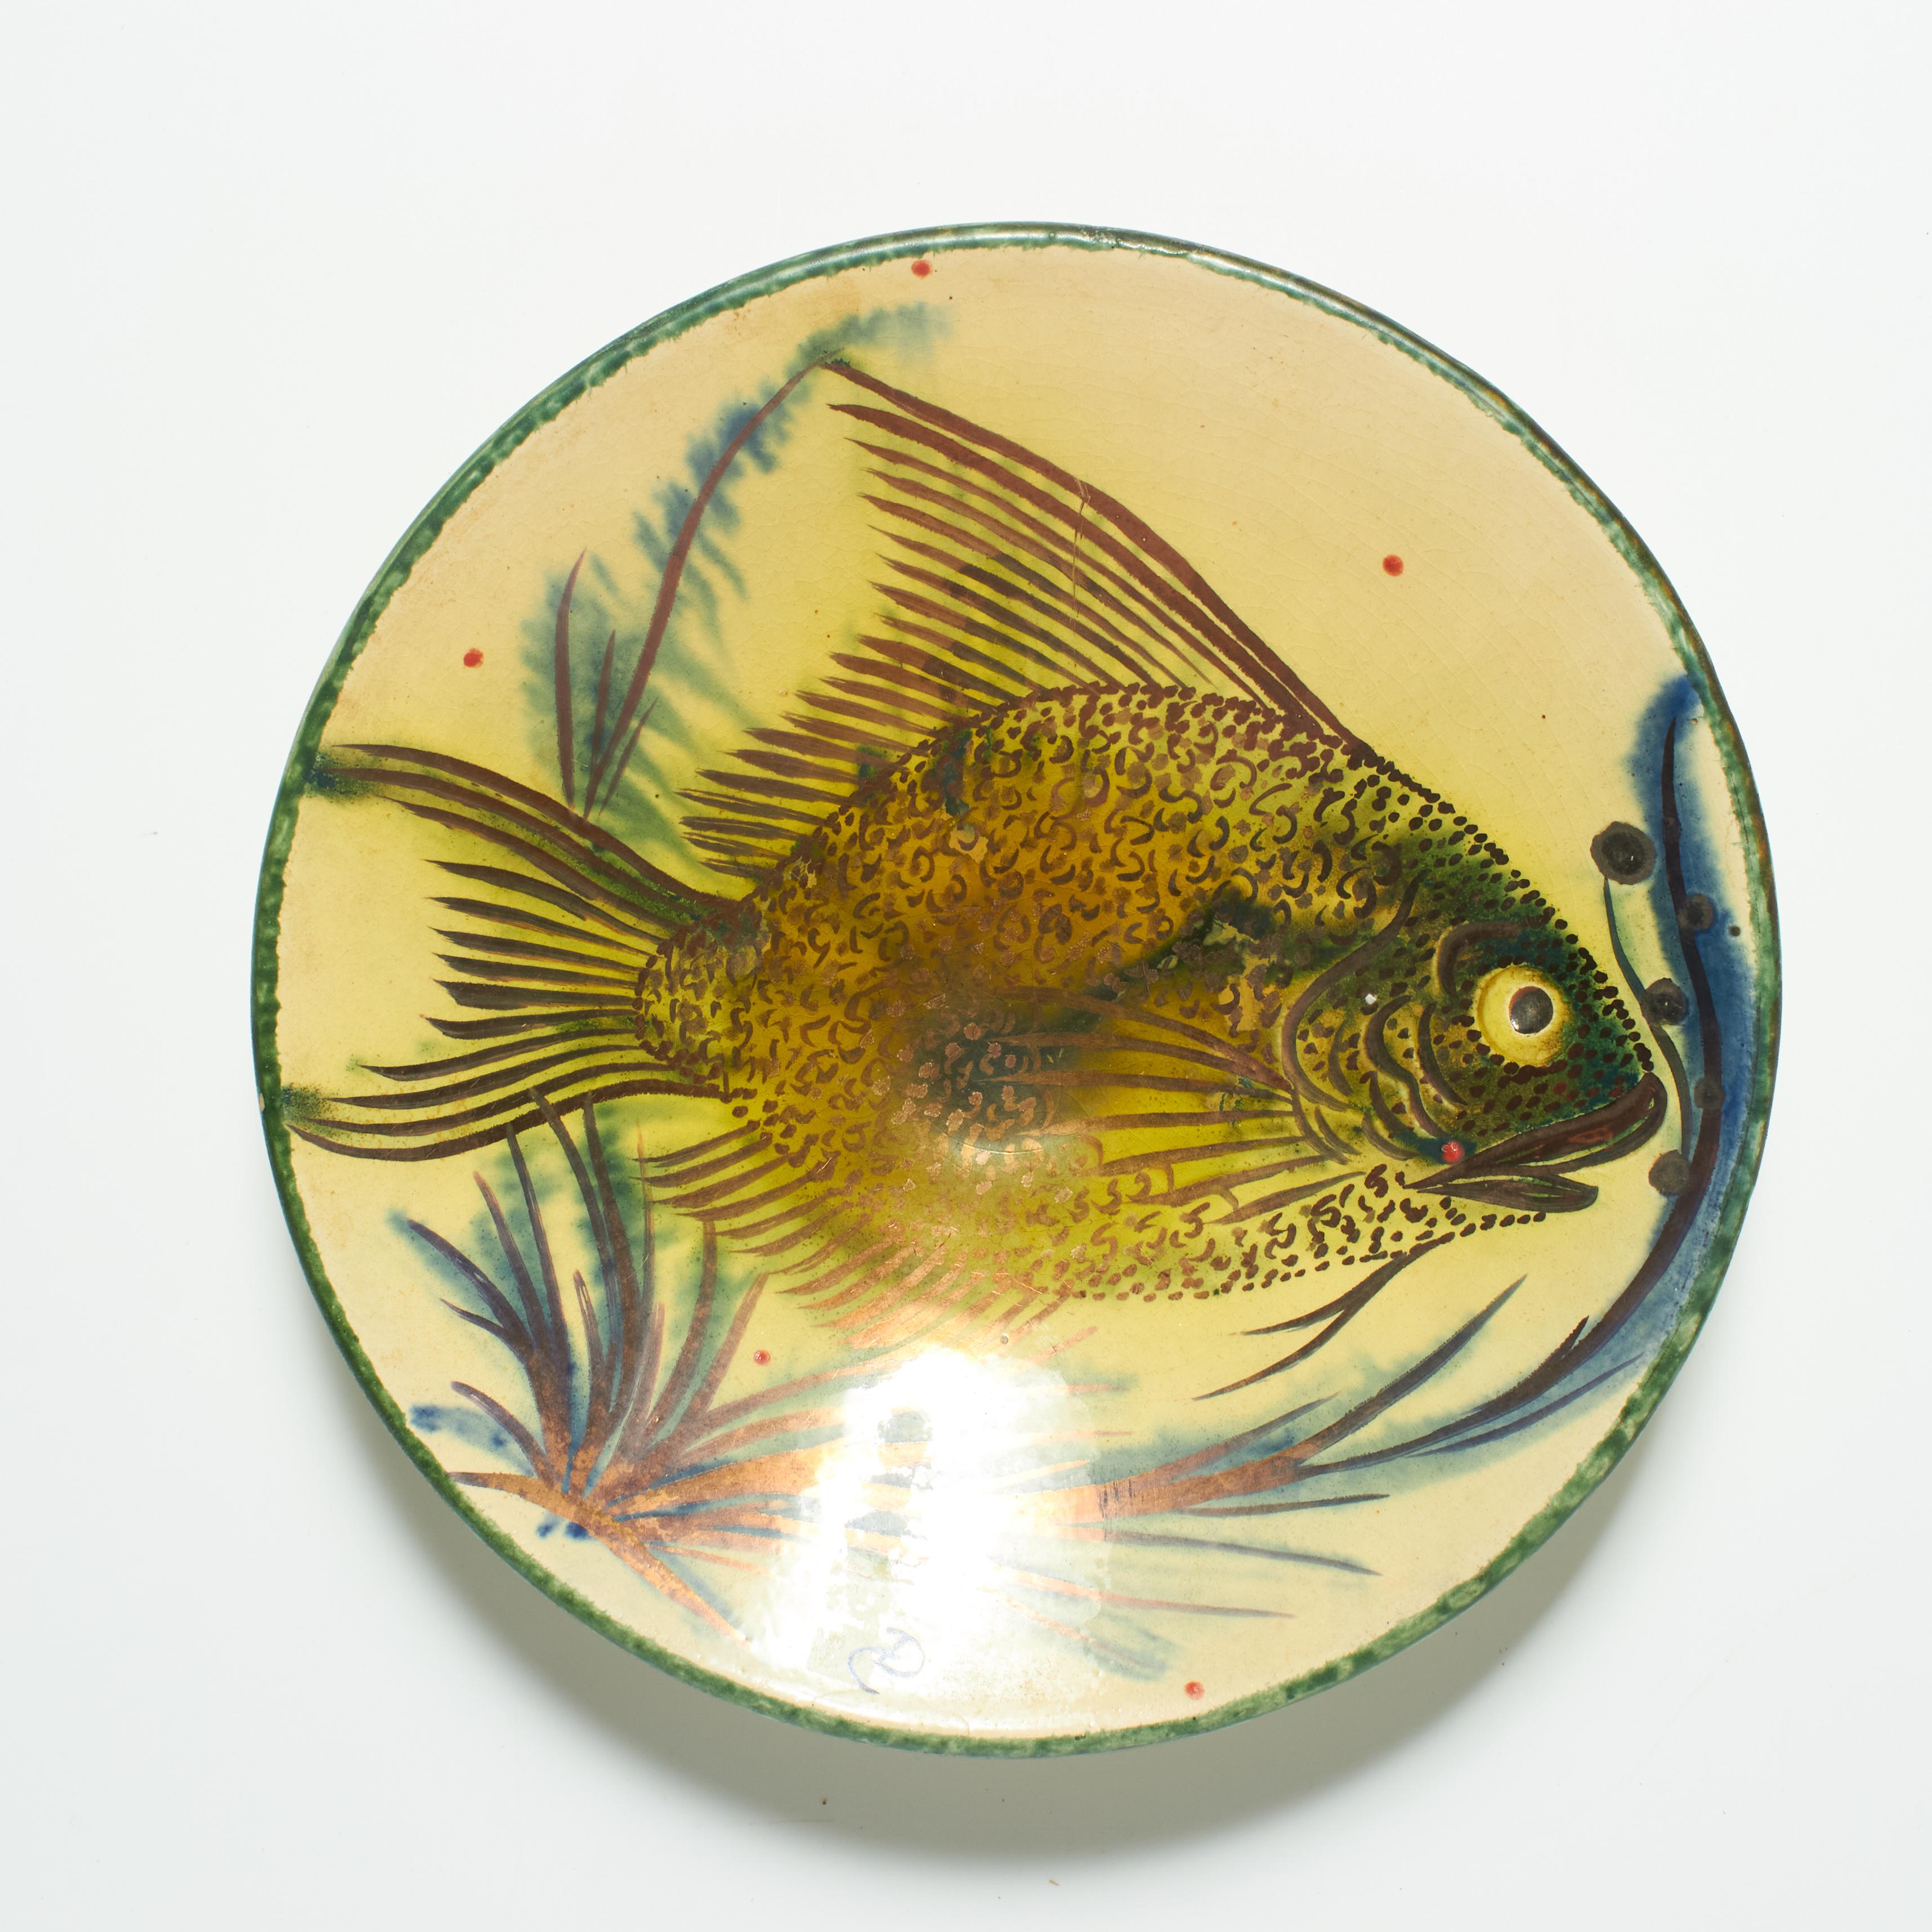 Mid-Century Modern Ceramic Traditional Hand Painted Plate by Catalan Artist Diaz Costa, circa 1960